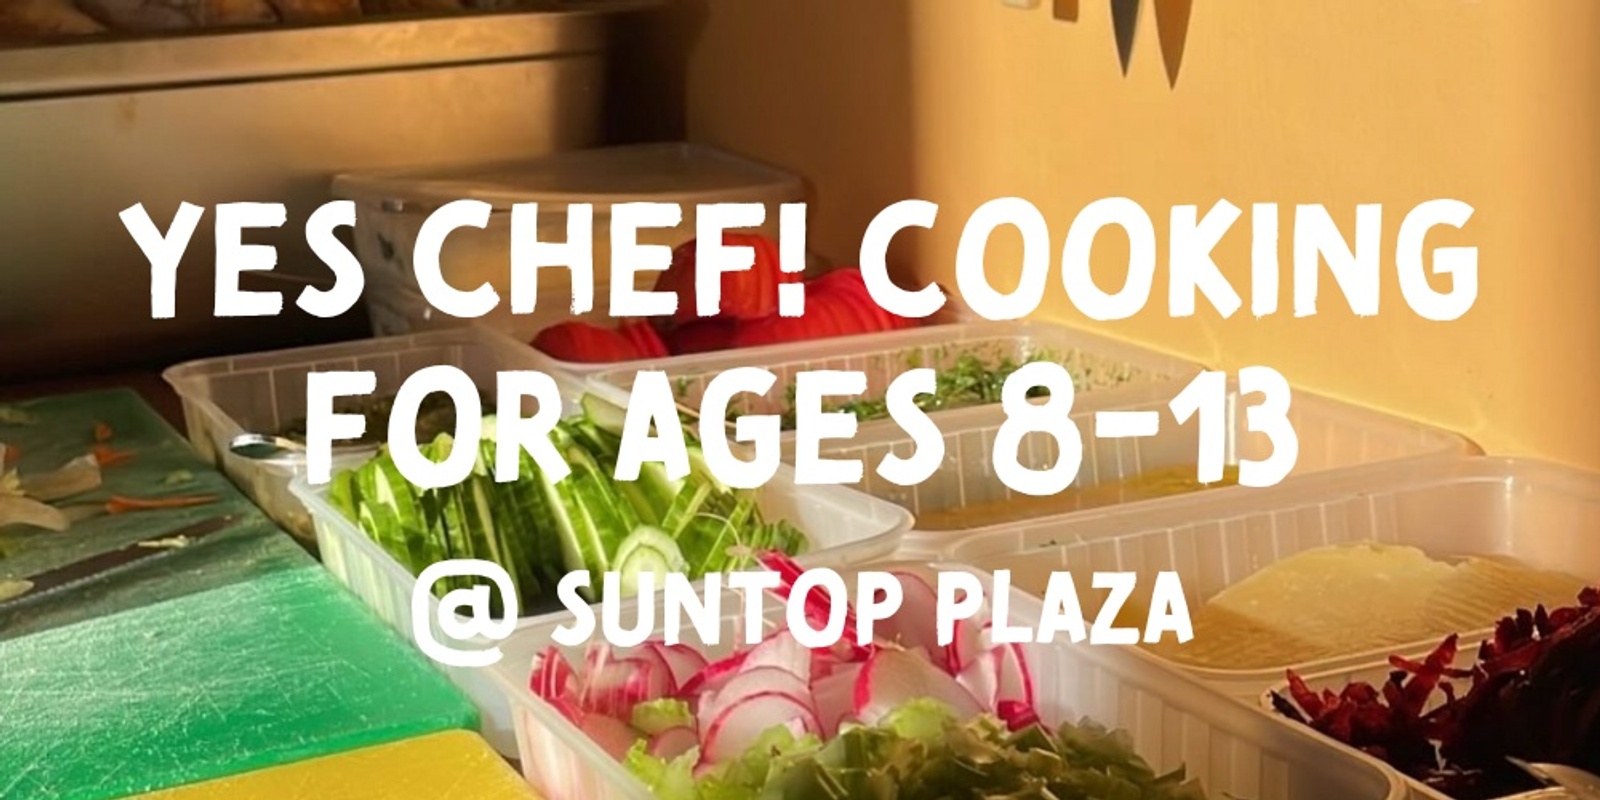 Banner image for Yes Chef! Cooking School for Ages 8-13